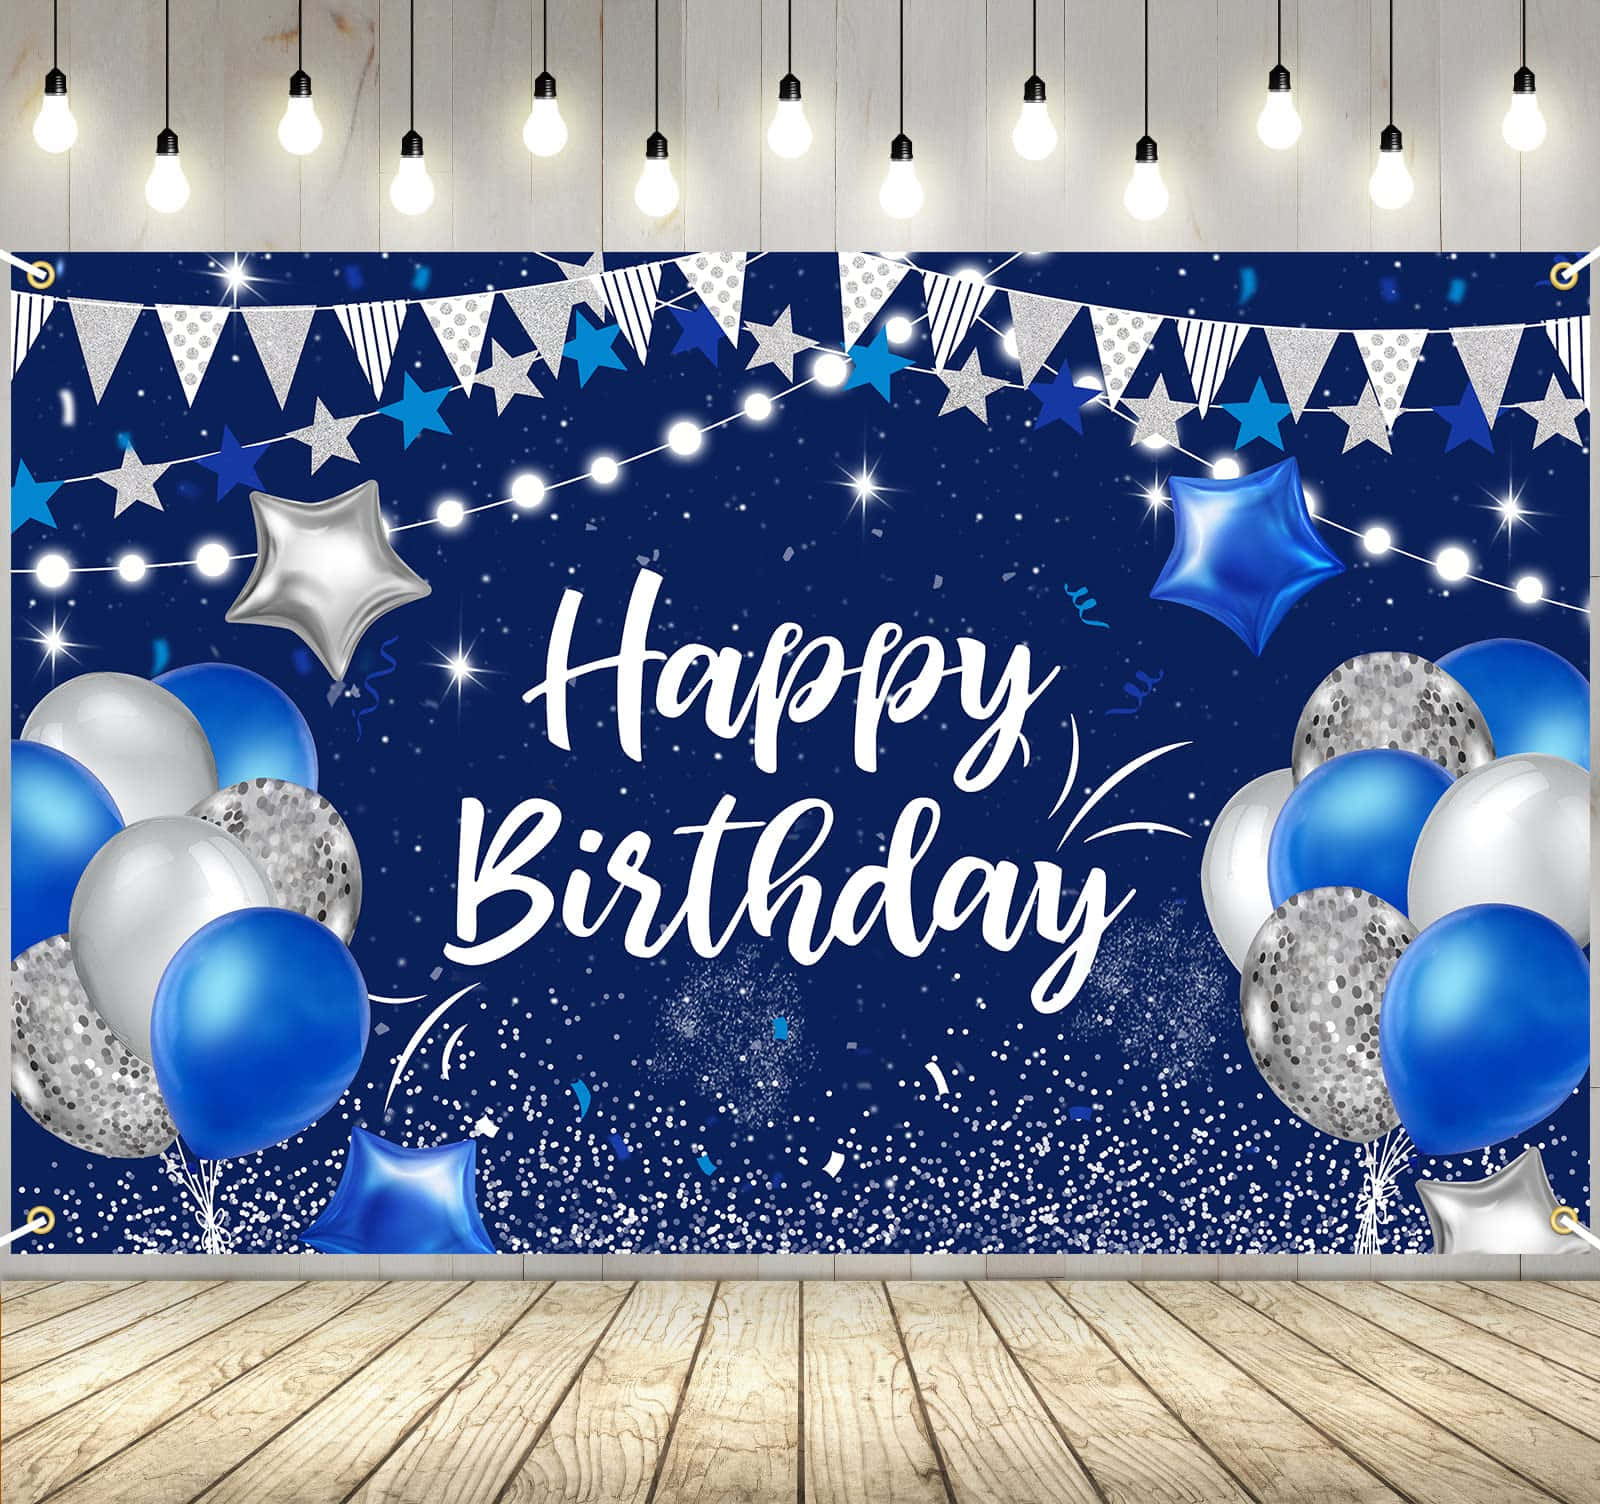 Happy Birthday Banner With Blue And Silver Balloons